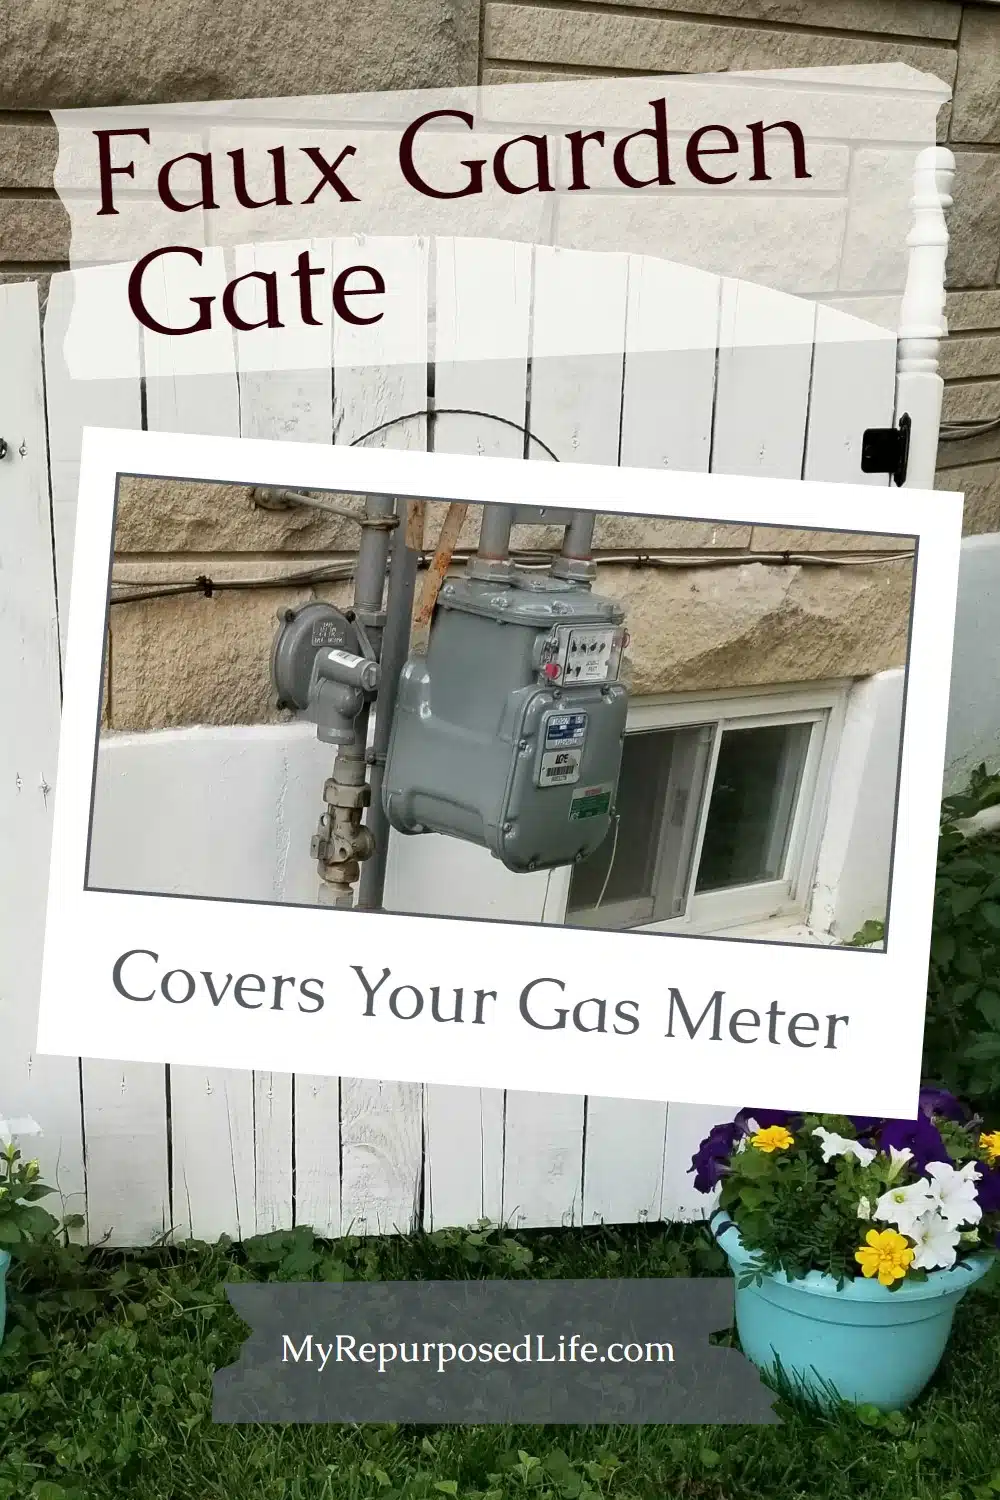 How to disguise an outdoor eyesore such as a gas meter with a faux garden gate using pallet wood and more #MyRepurposedLife #pallet #repurposed #gasmeter via @repurposedlife